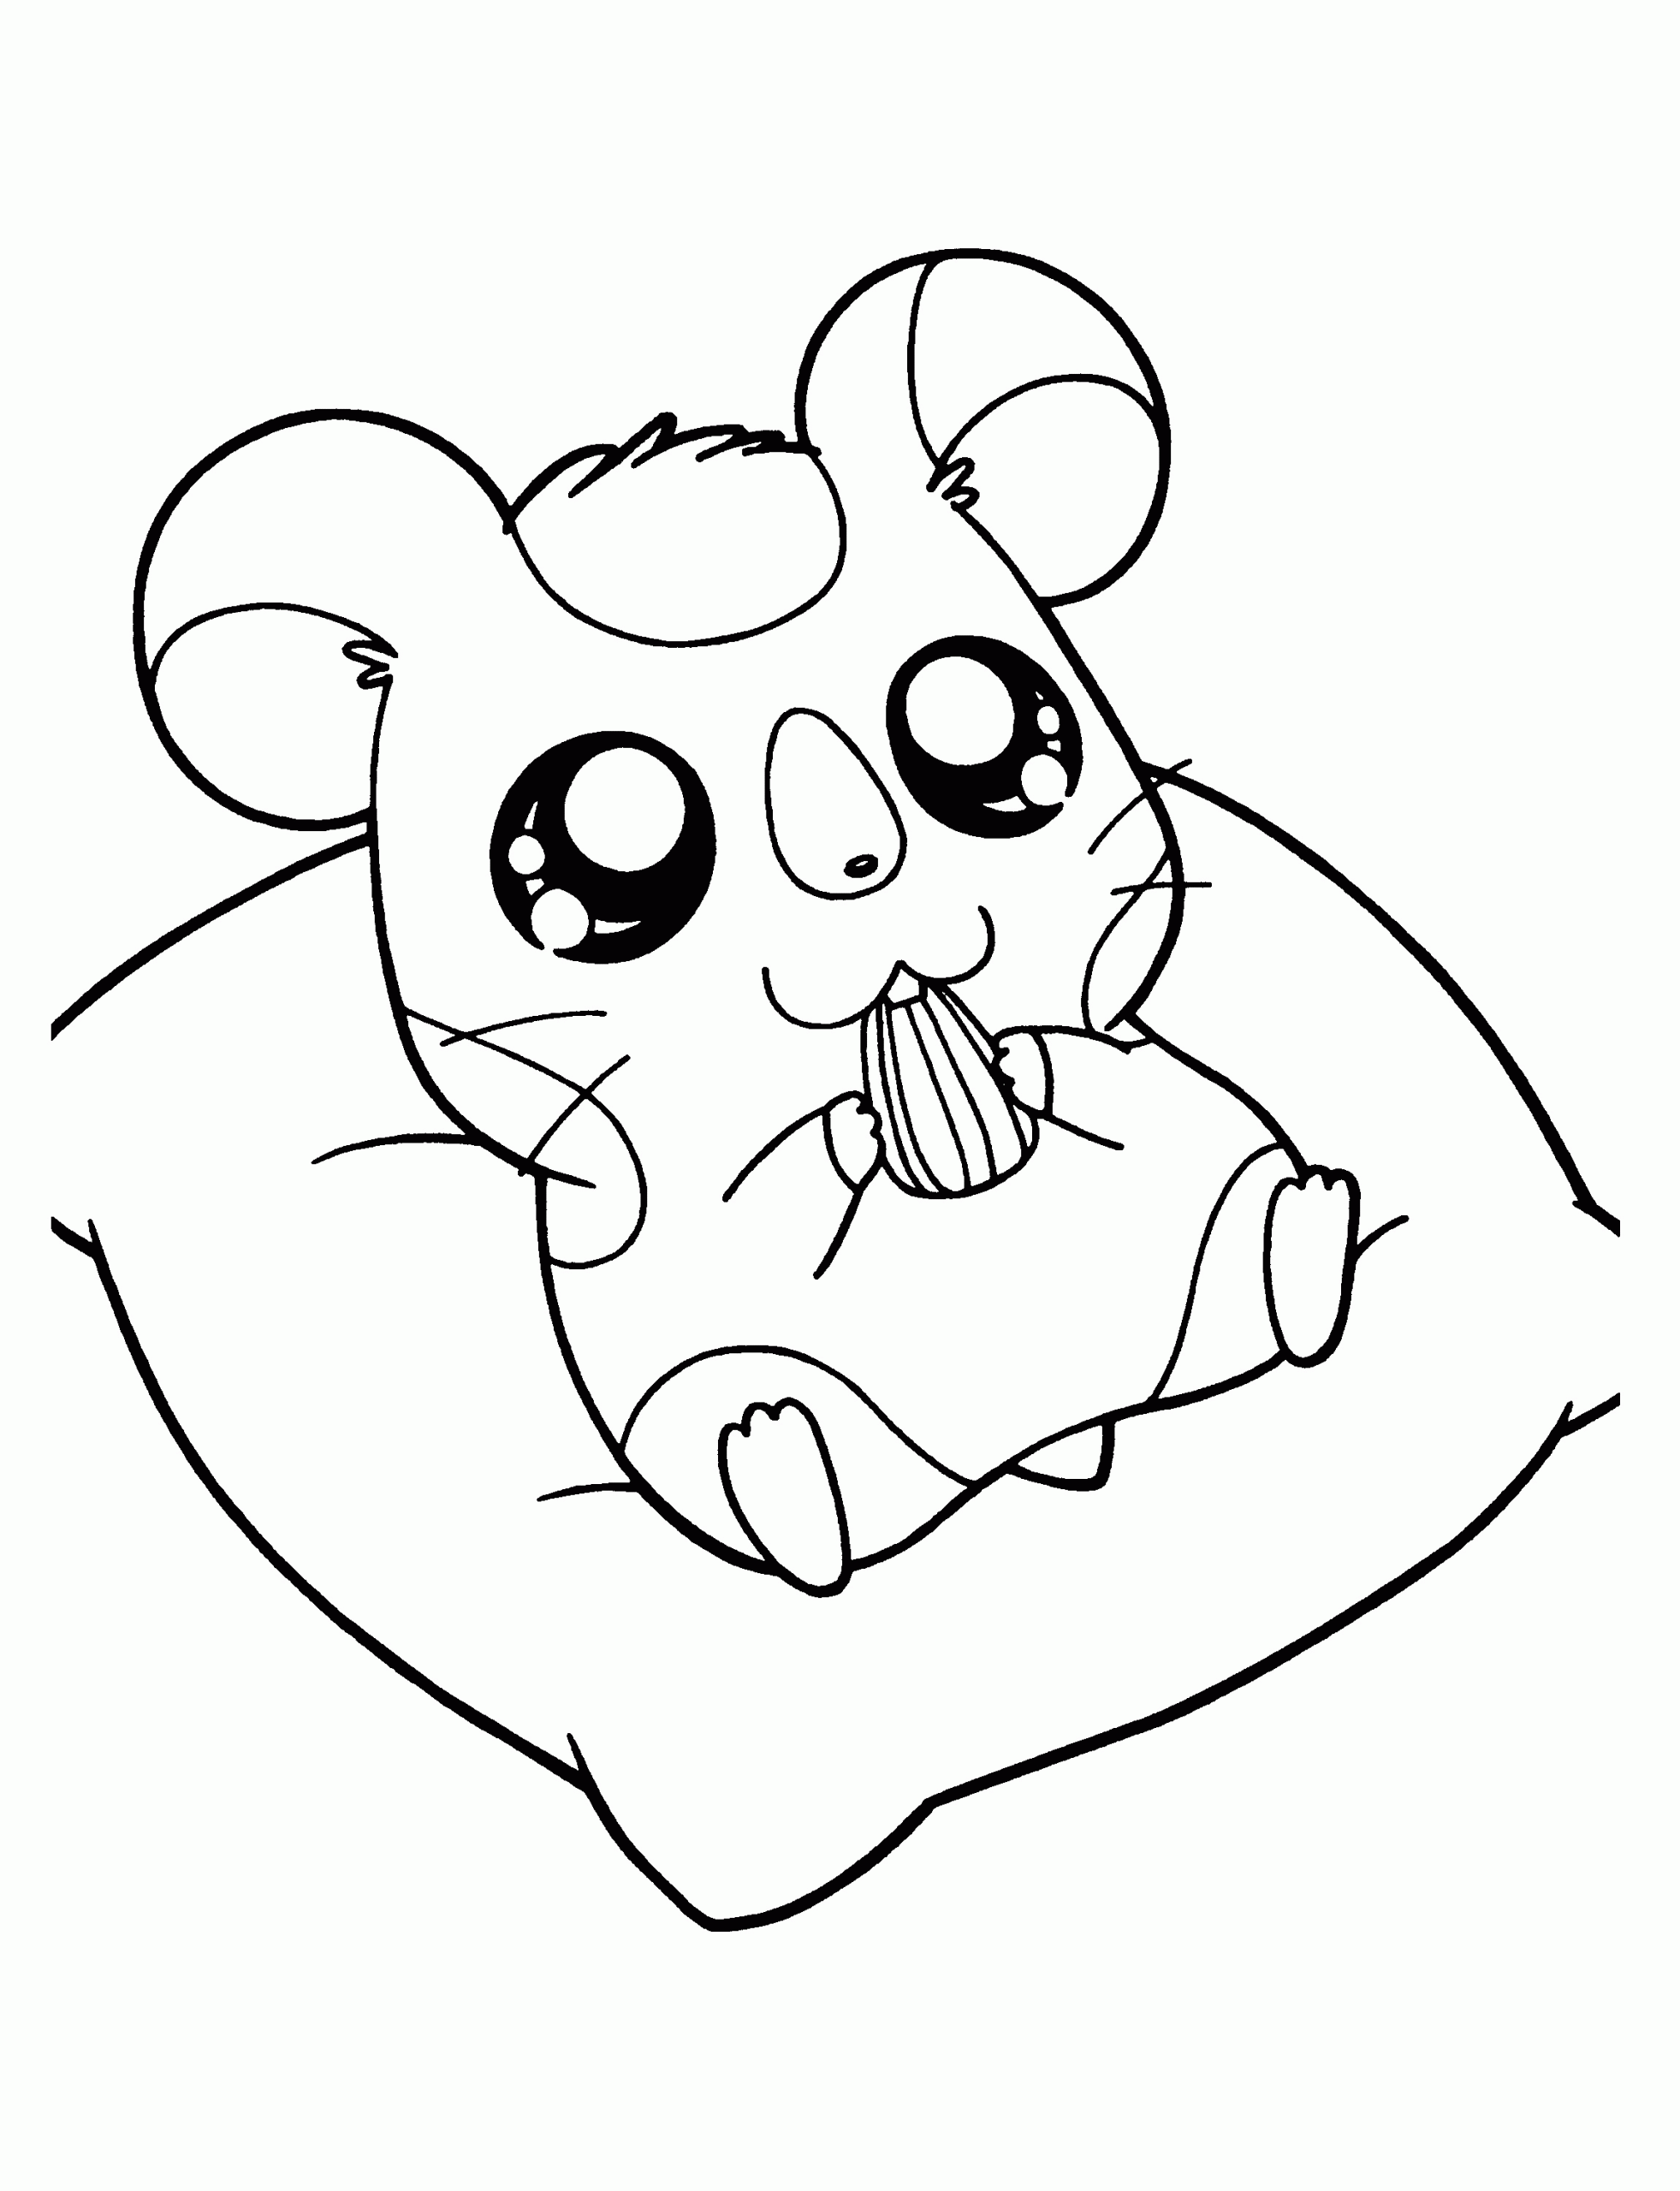 Baby Hamster Coloring Pages
 Hamster Coloring Pages To Print Coloring Pages